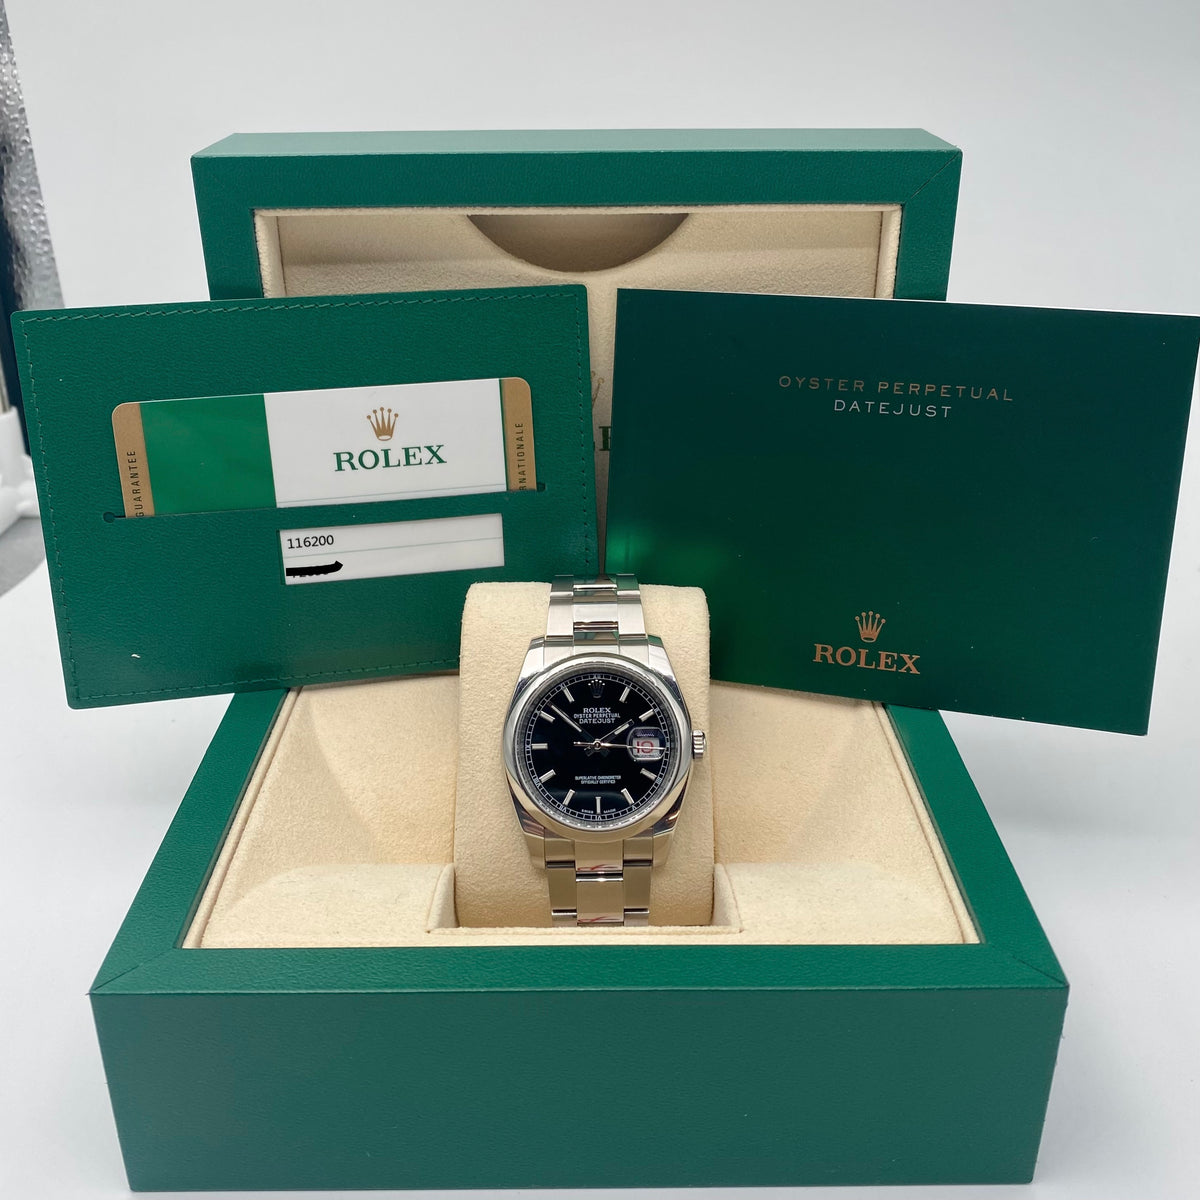 Pre Owned Rolex | Pre Owned Rolex Datejust | Pre Owned Rolex With a Black Dial | Pre Owned Rolex Oyster Bracelet | Pre Owned Roulette Date Wheel Date | Pre Owned Rolex Dublin 